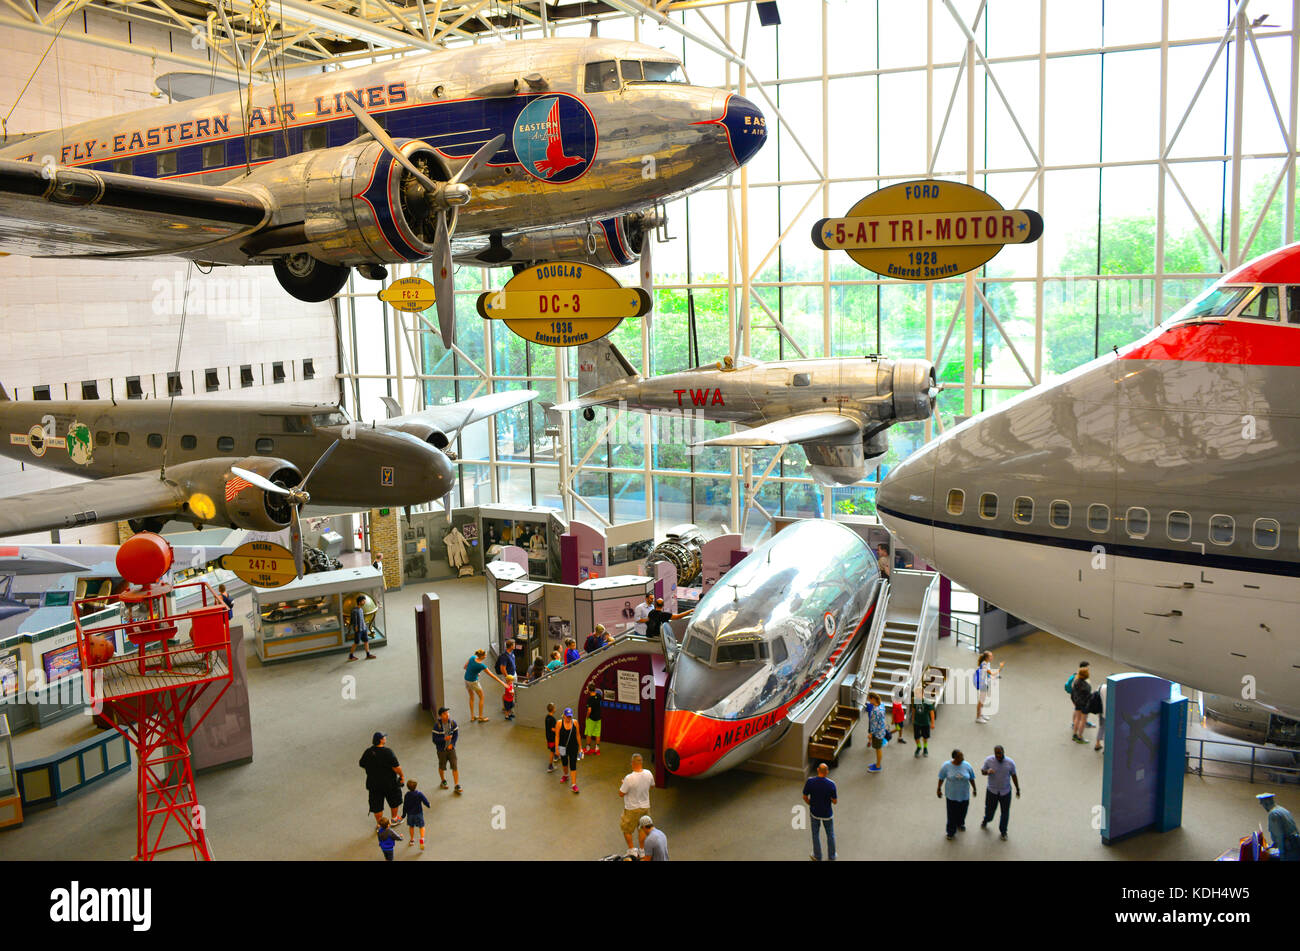 An assortment of vintage American airplanes on display at the National Air and Space Museum, Washington, DC, USA Stock Photo